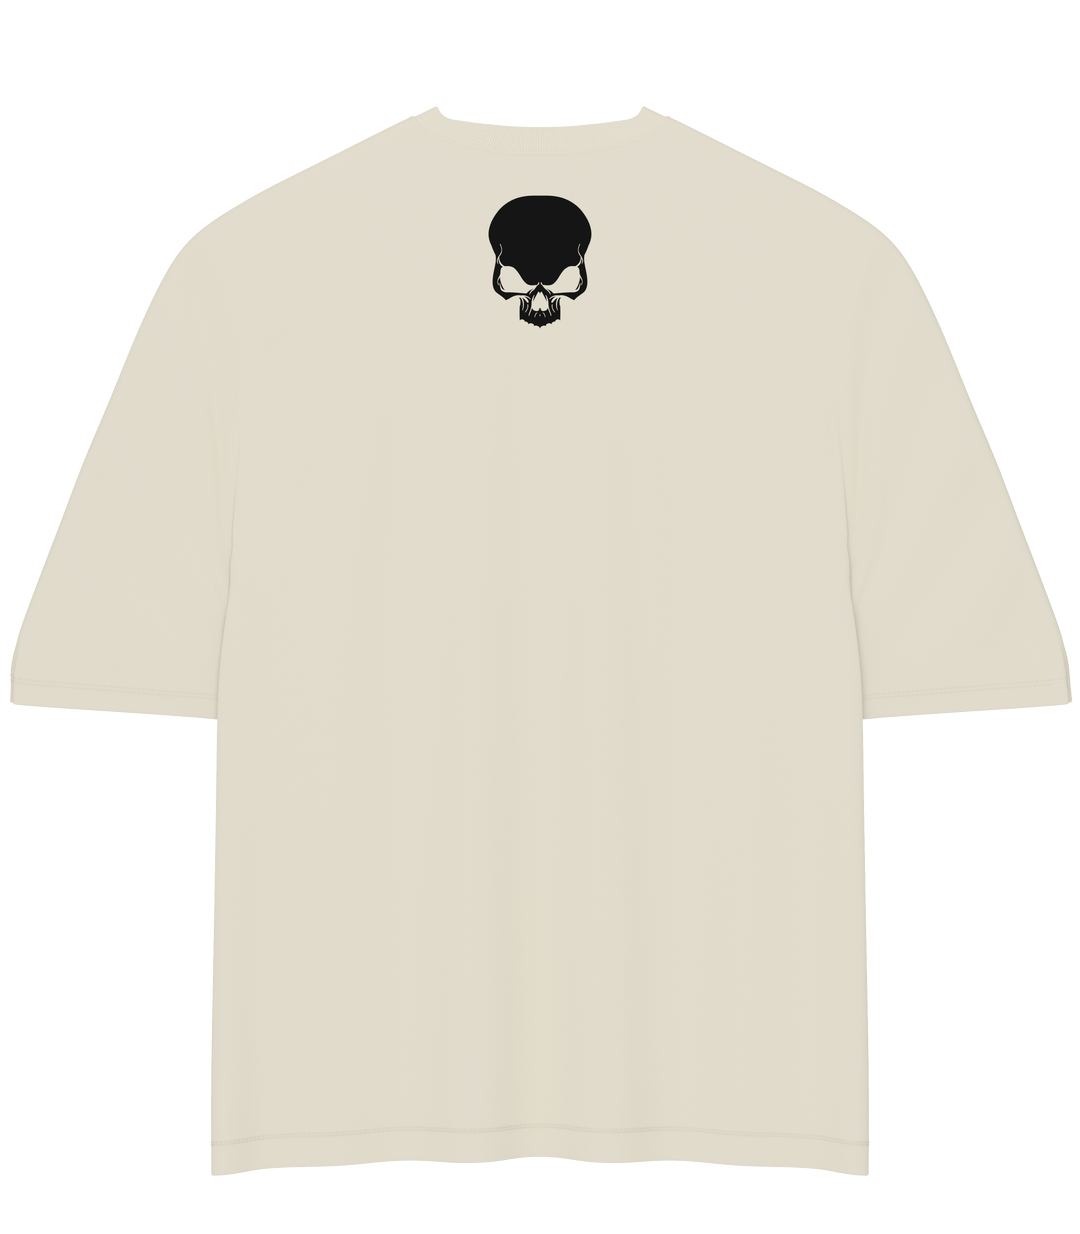 WARCRY® Oversized T-Shirt